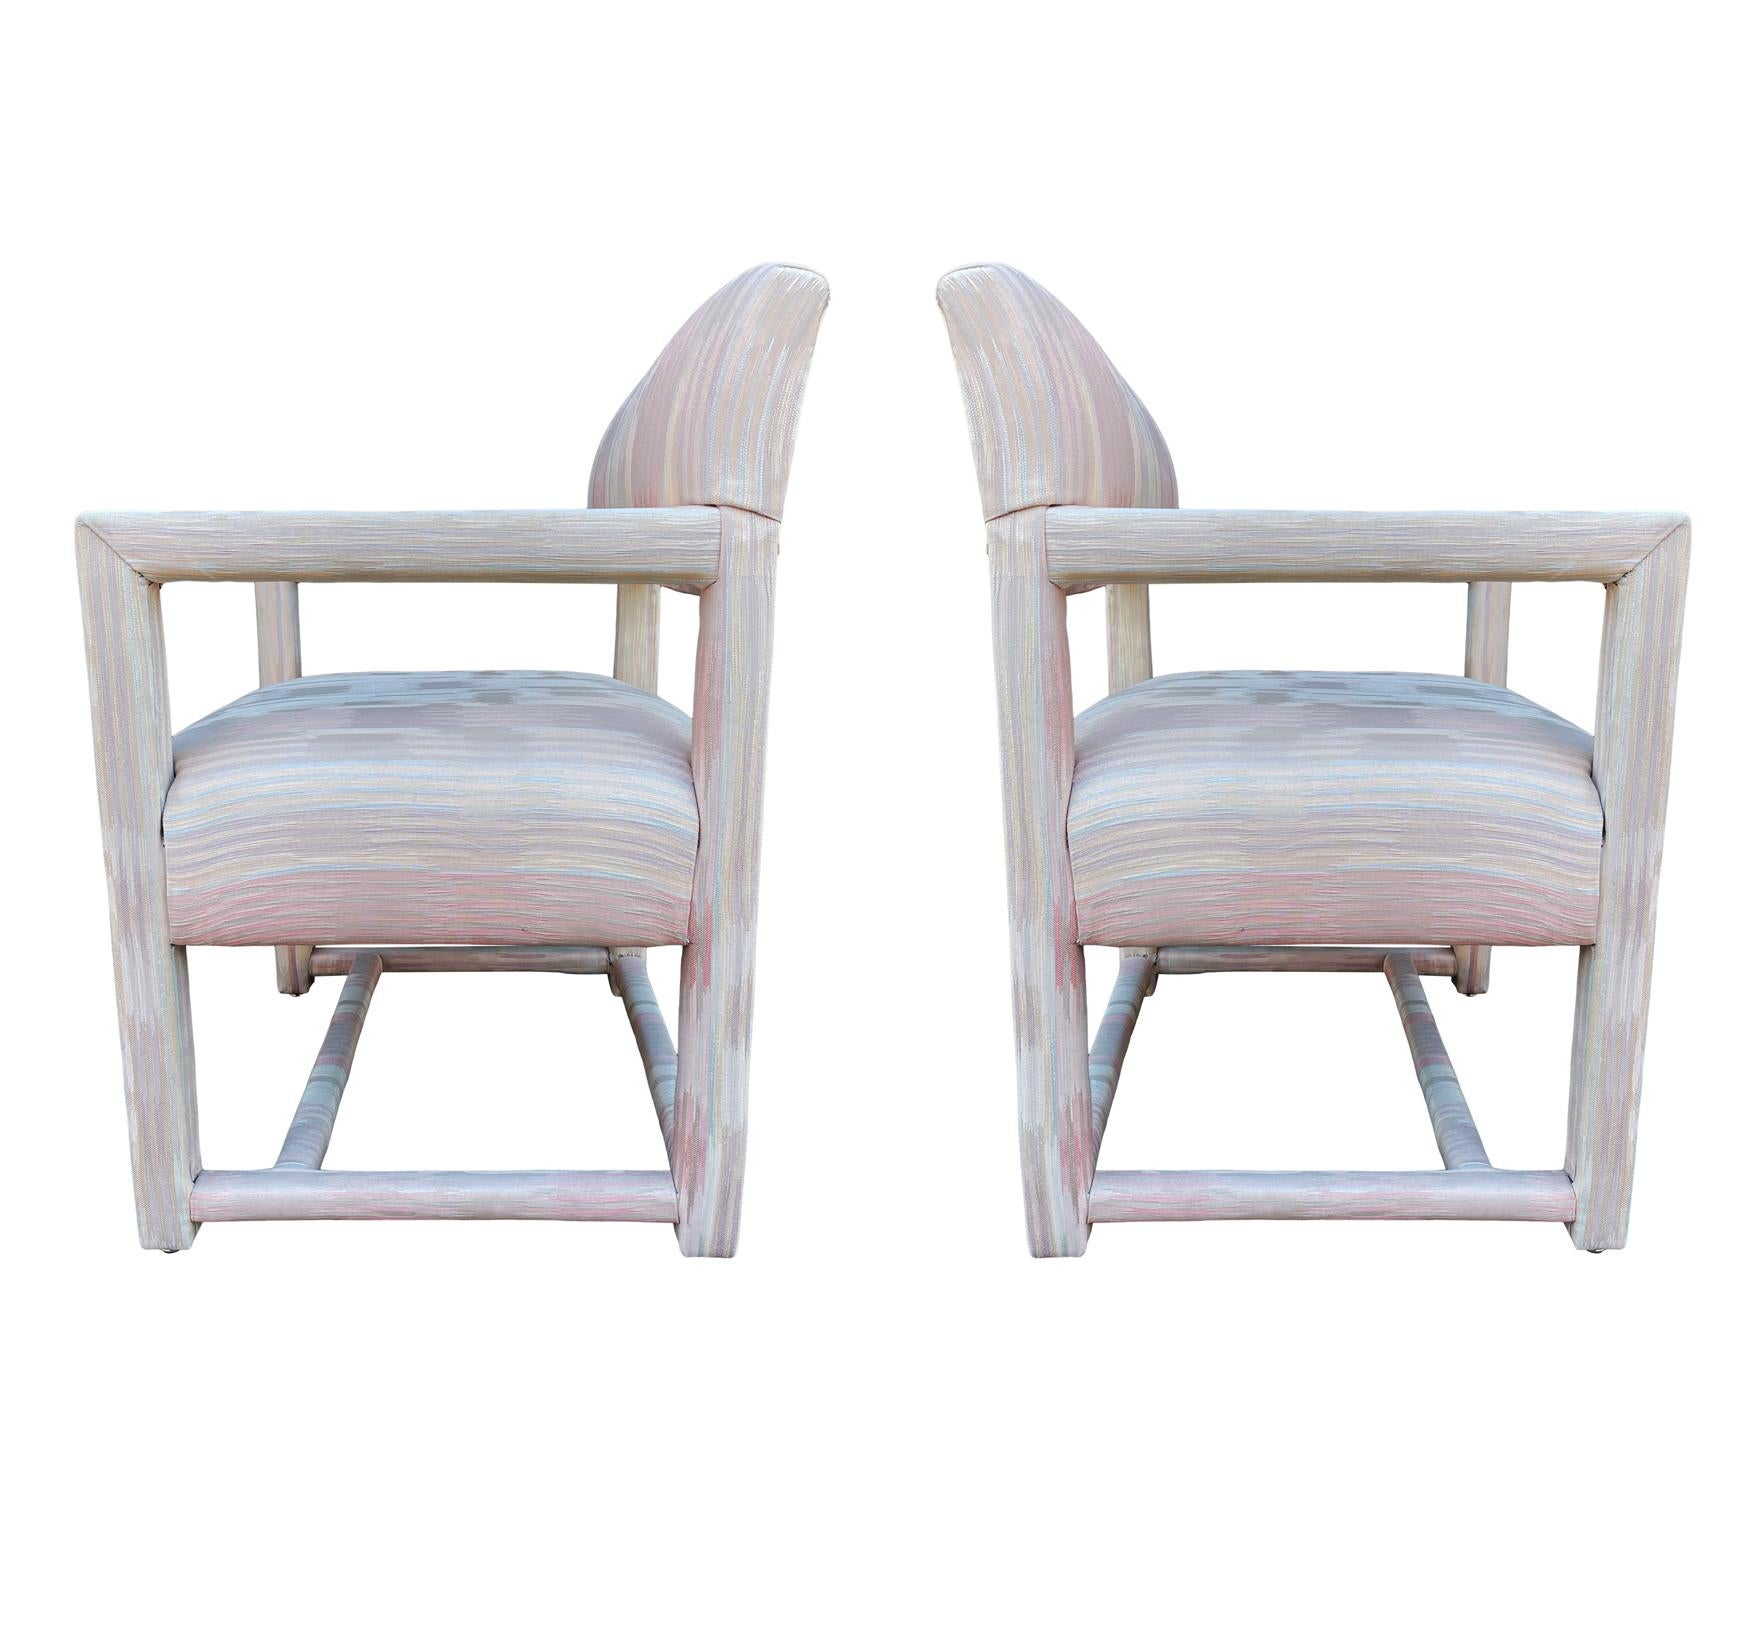 Pair of Mid-Century Modern Parsons Armchair Lounge Chairs after Milo Baughman For Sale 3